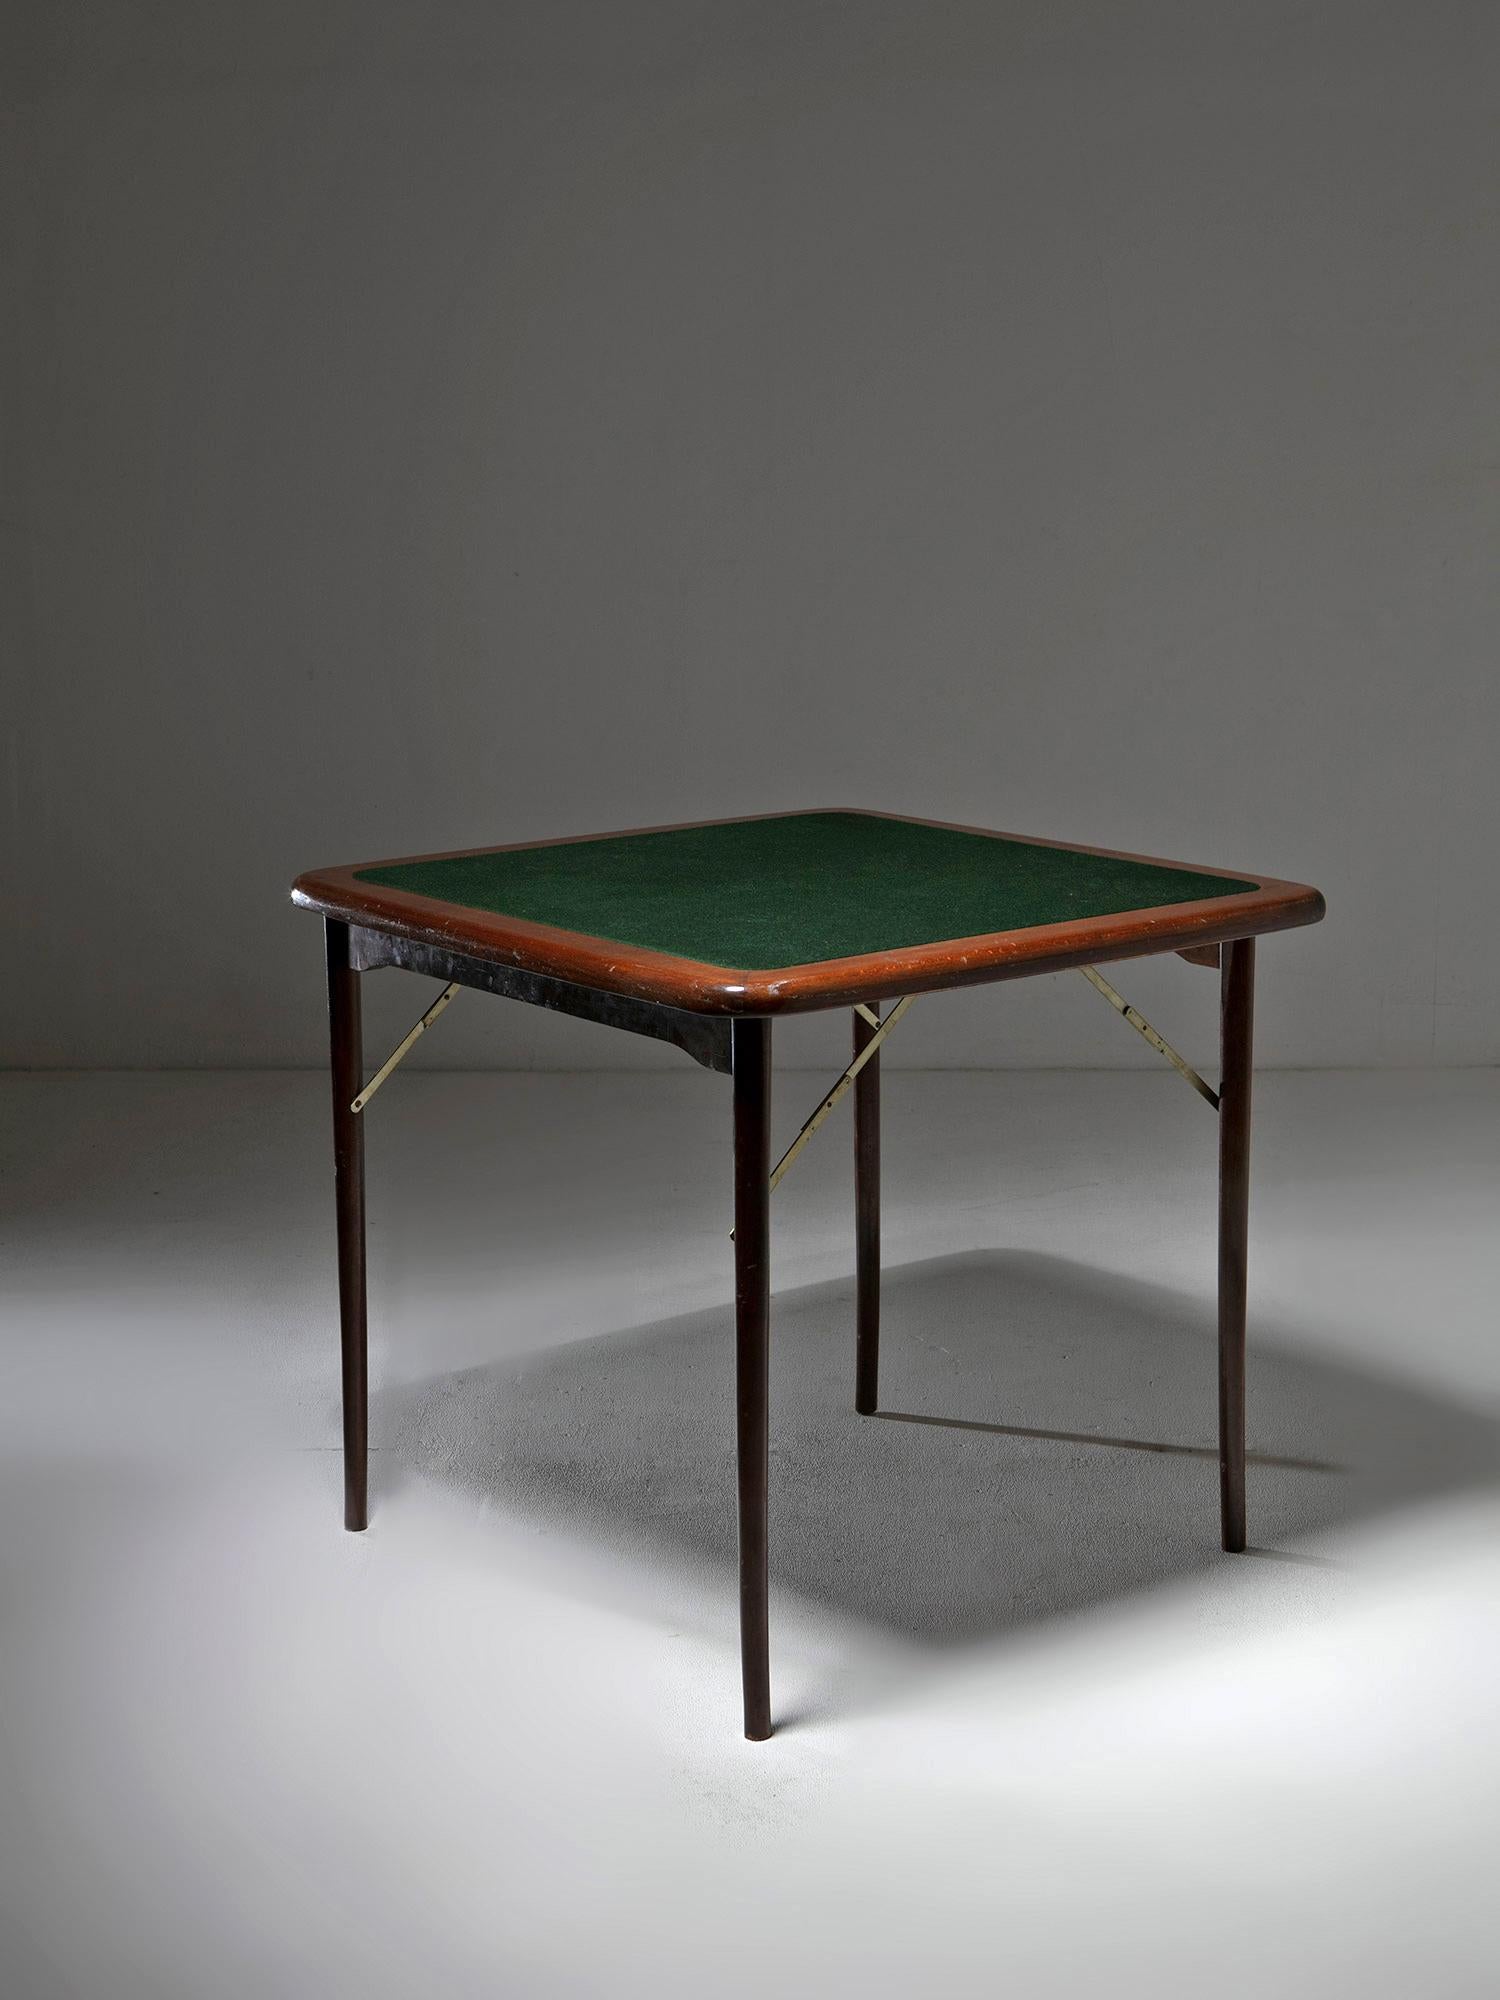 Italian Wood and Cloth Folding Game Table, Italy, 1960s For Sale